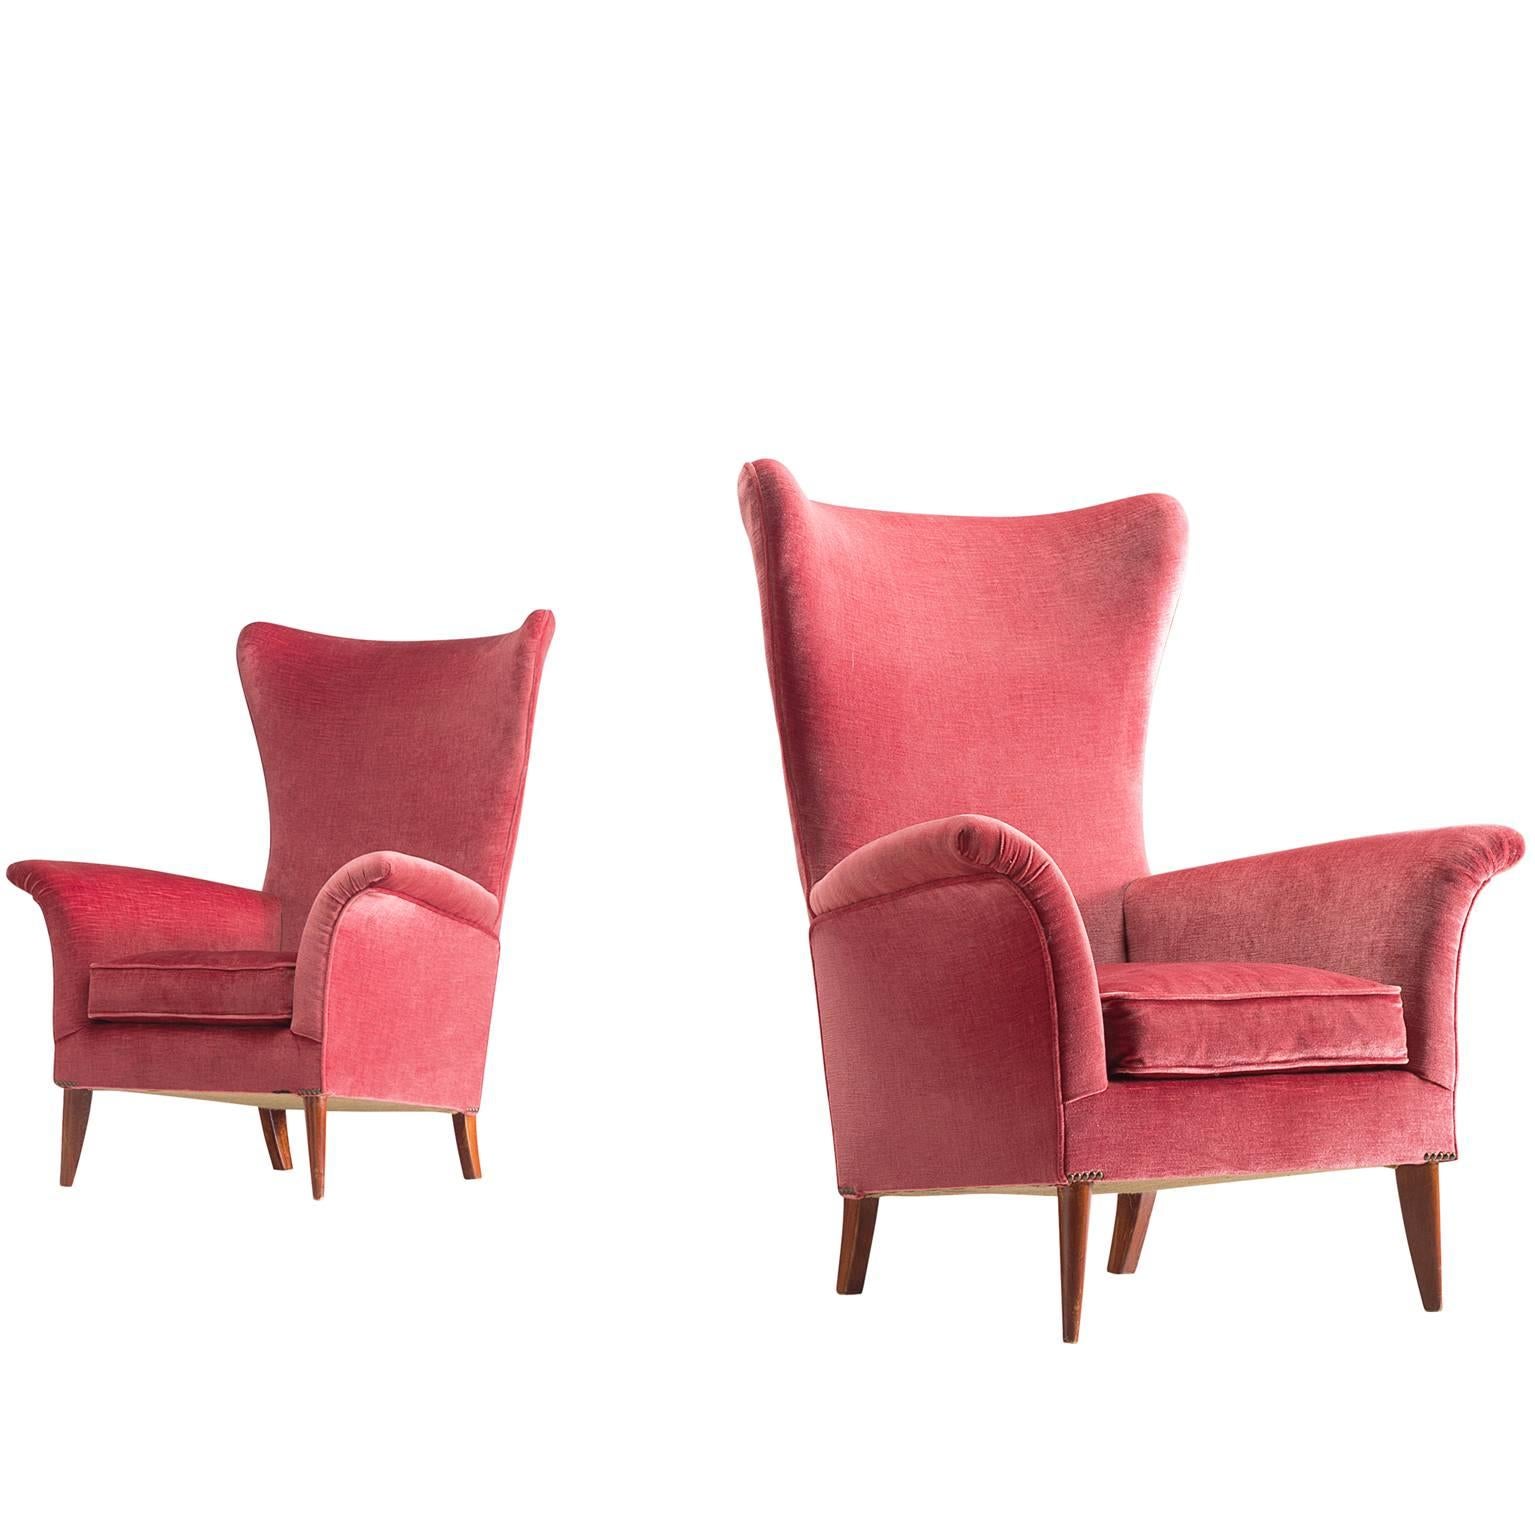 Set of Two High Wingback Chairs, Velvet and Wood, Italy, 1950s